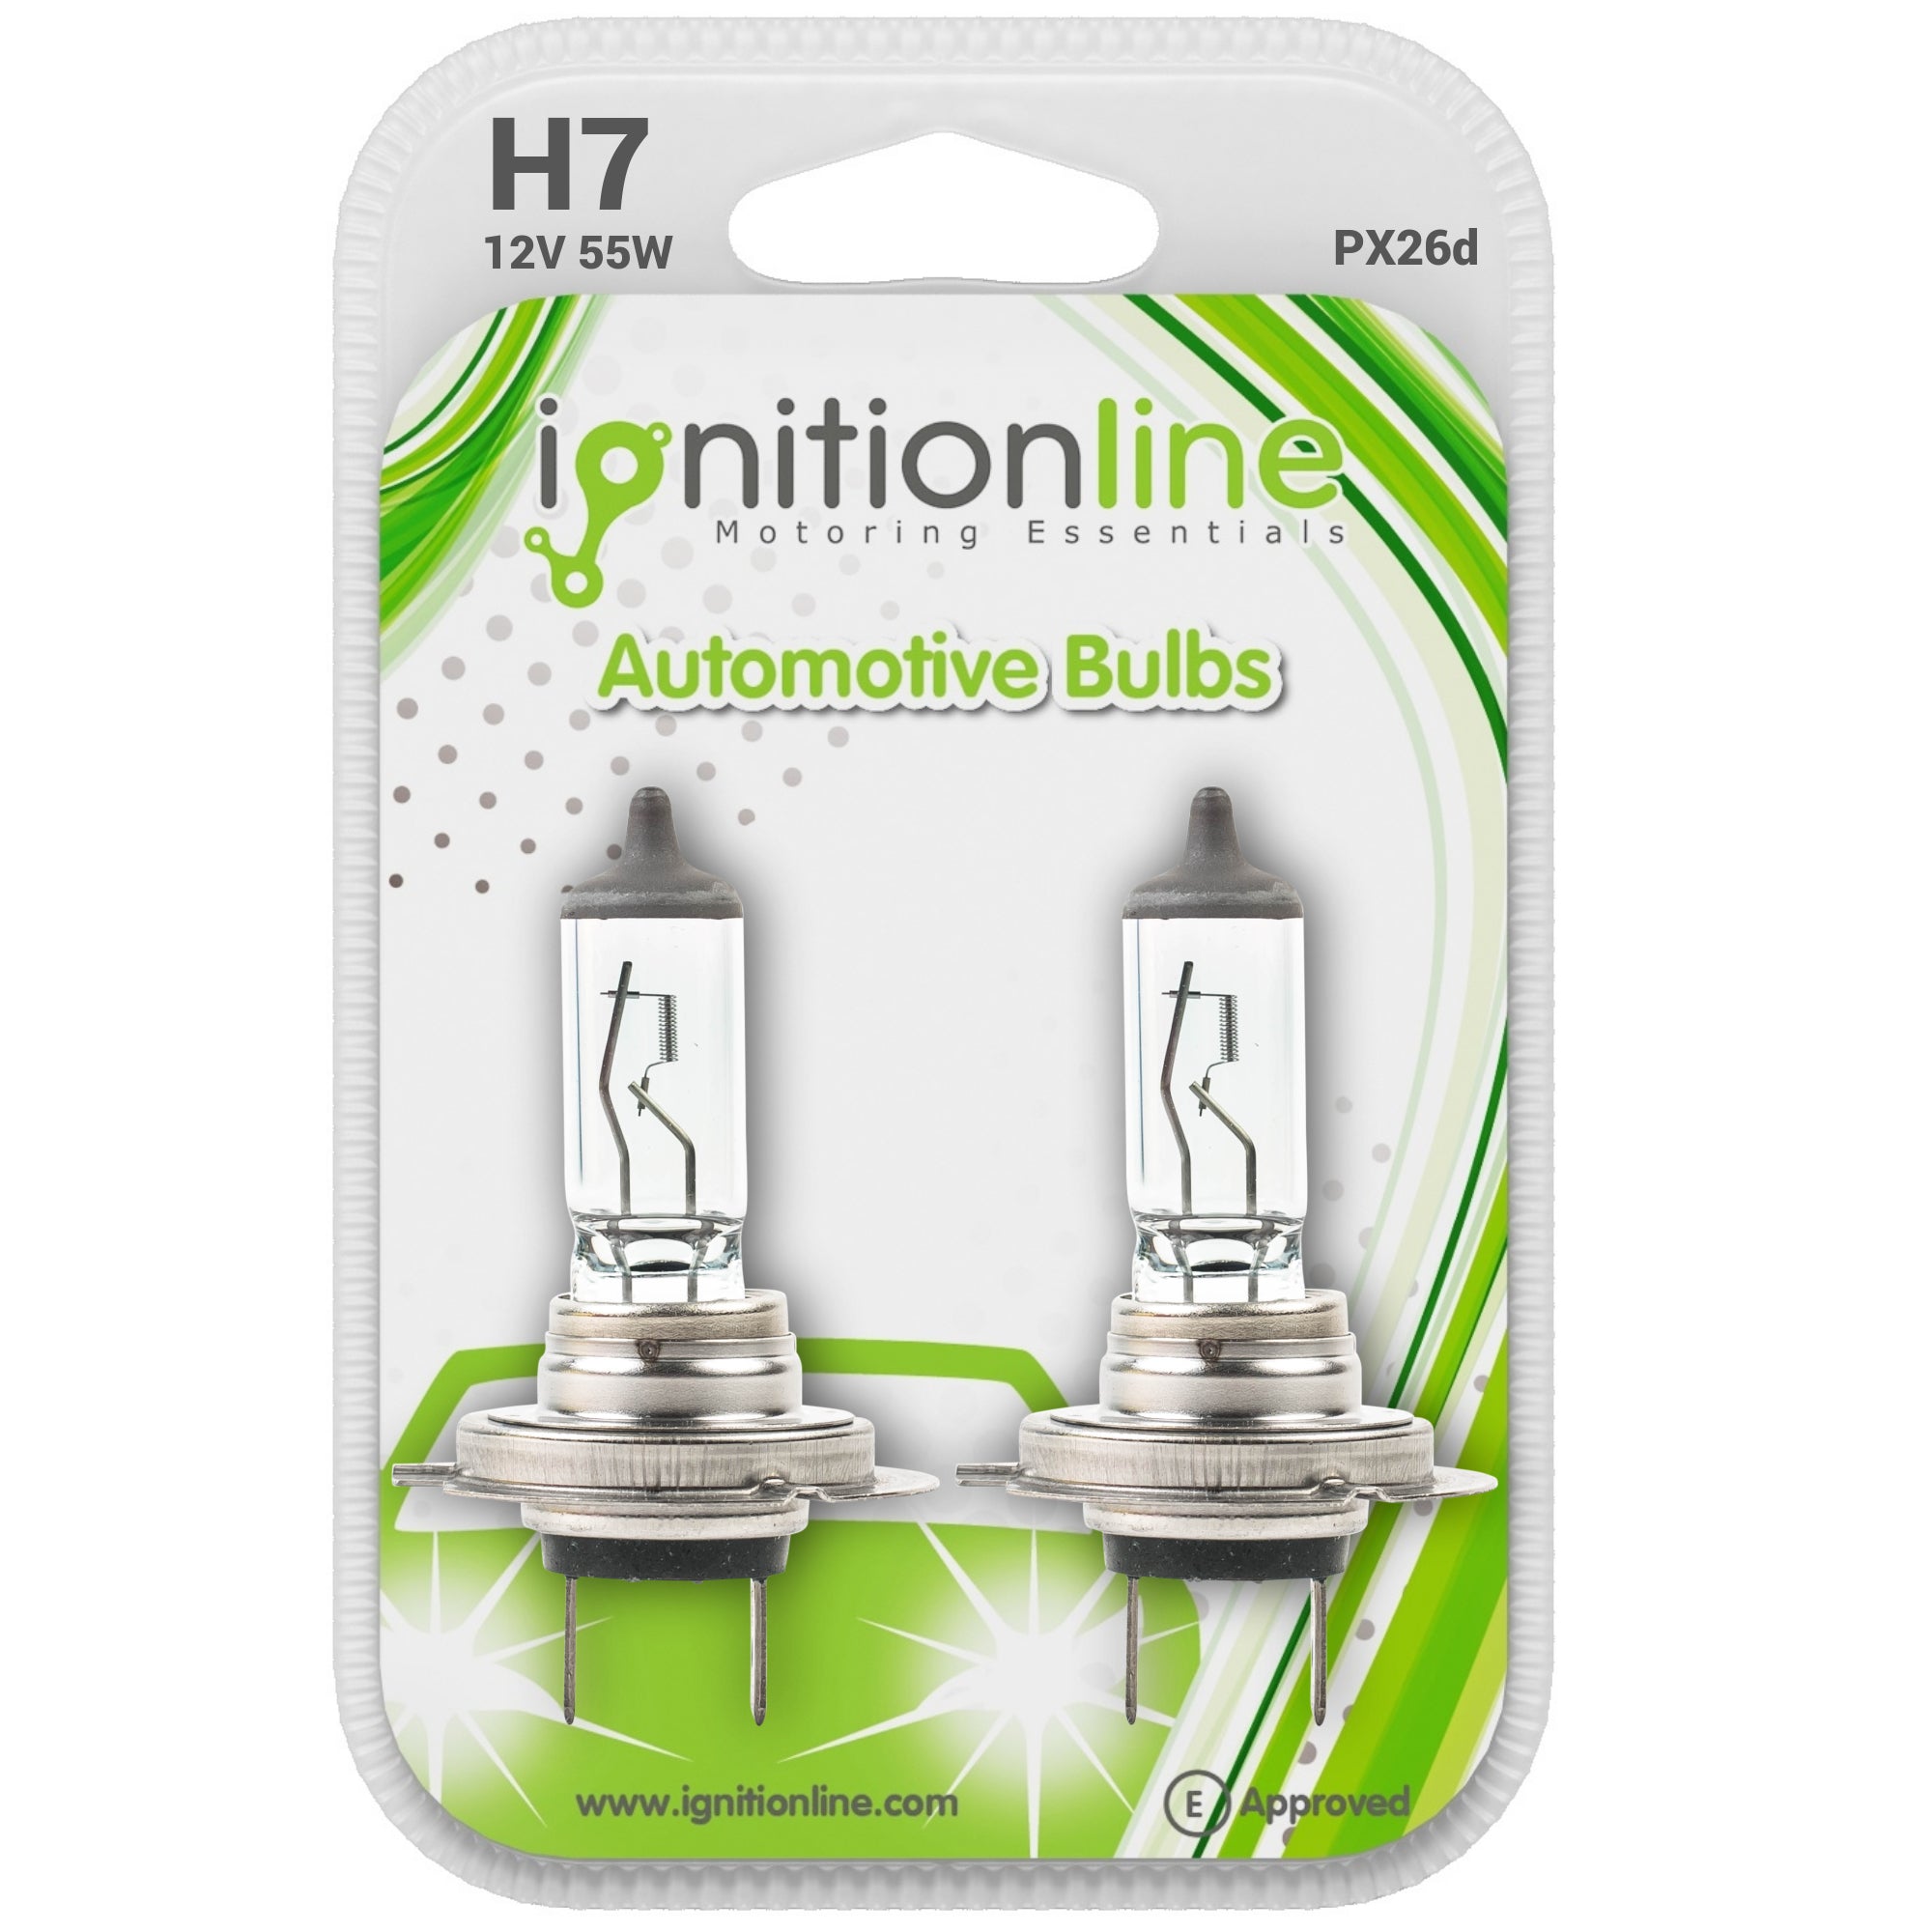 IgnitionLine H7 12V 55W Halogen Headlight Bulbs (Twin Pack) PX26d